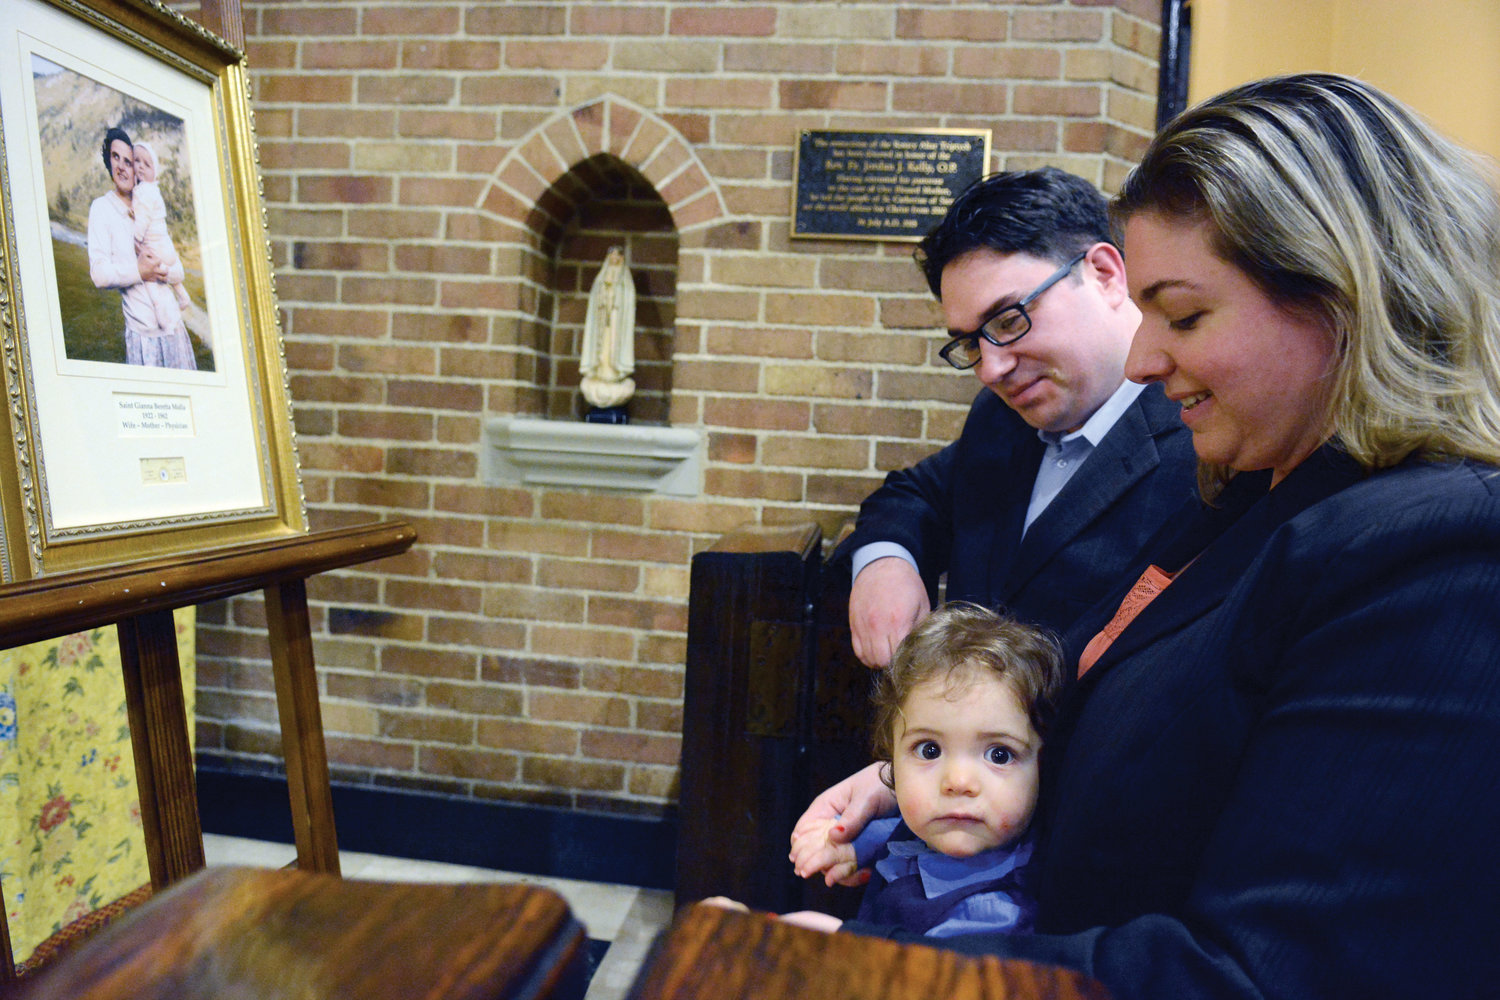 Jason and Carrie Caminiti kneel with their 14-month-old son Christian during veneration in front of a framed photo and relic of St. Gianna Beretta Molla at St. Catherine of Siena Church in Manhattan May 16.